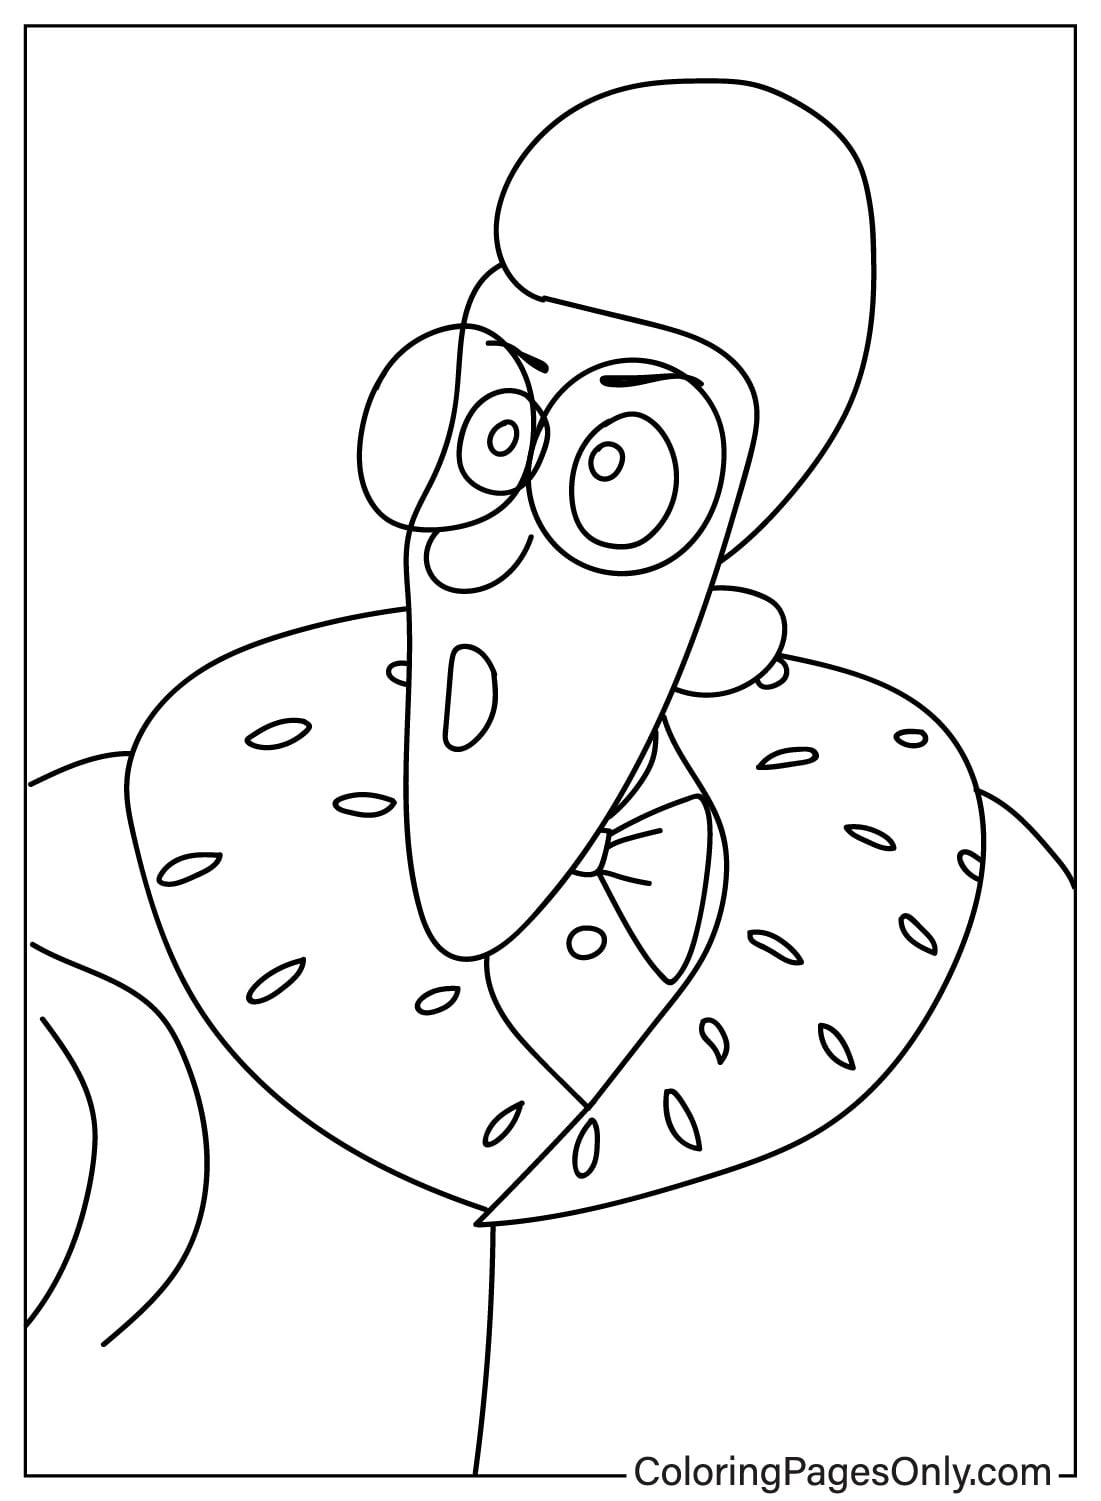 Despicable Me 4 Coloring Book - Free Printable Coloring Pages